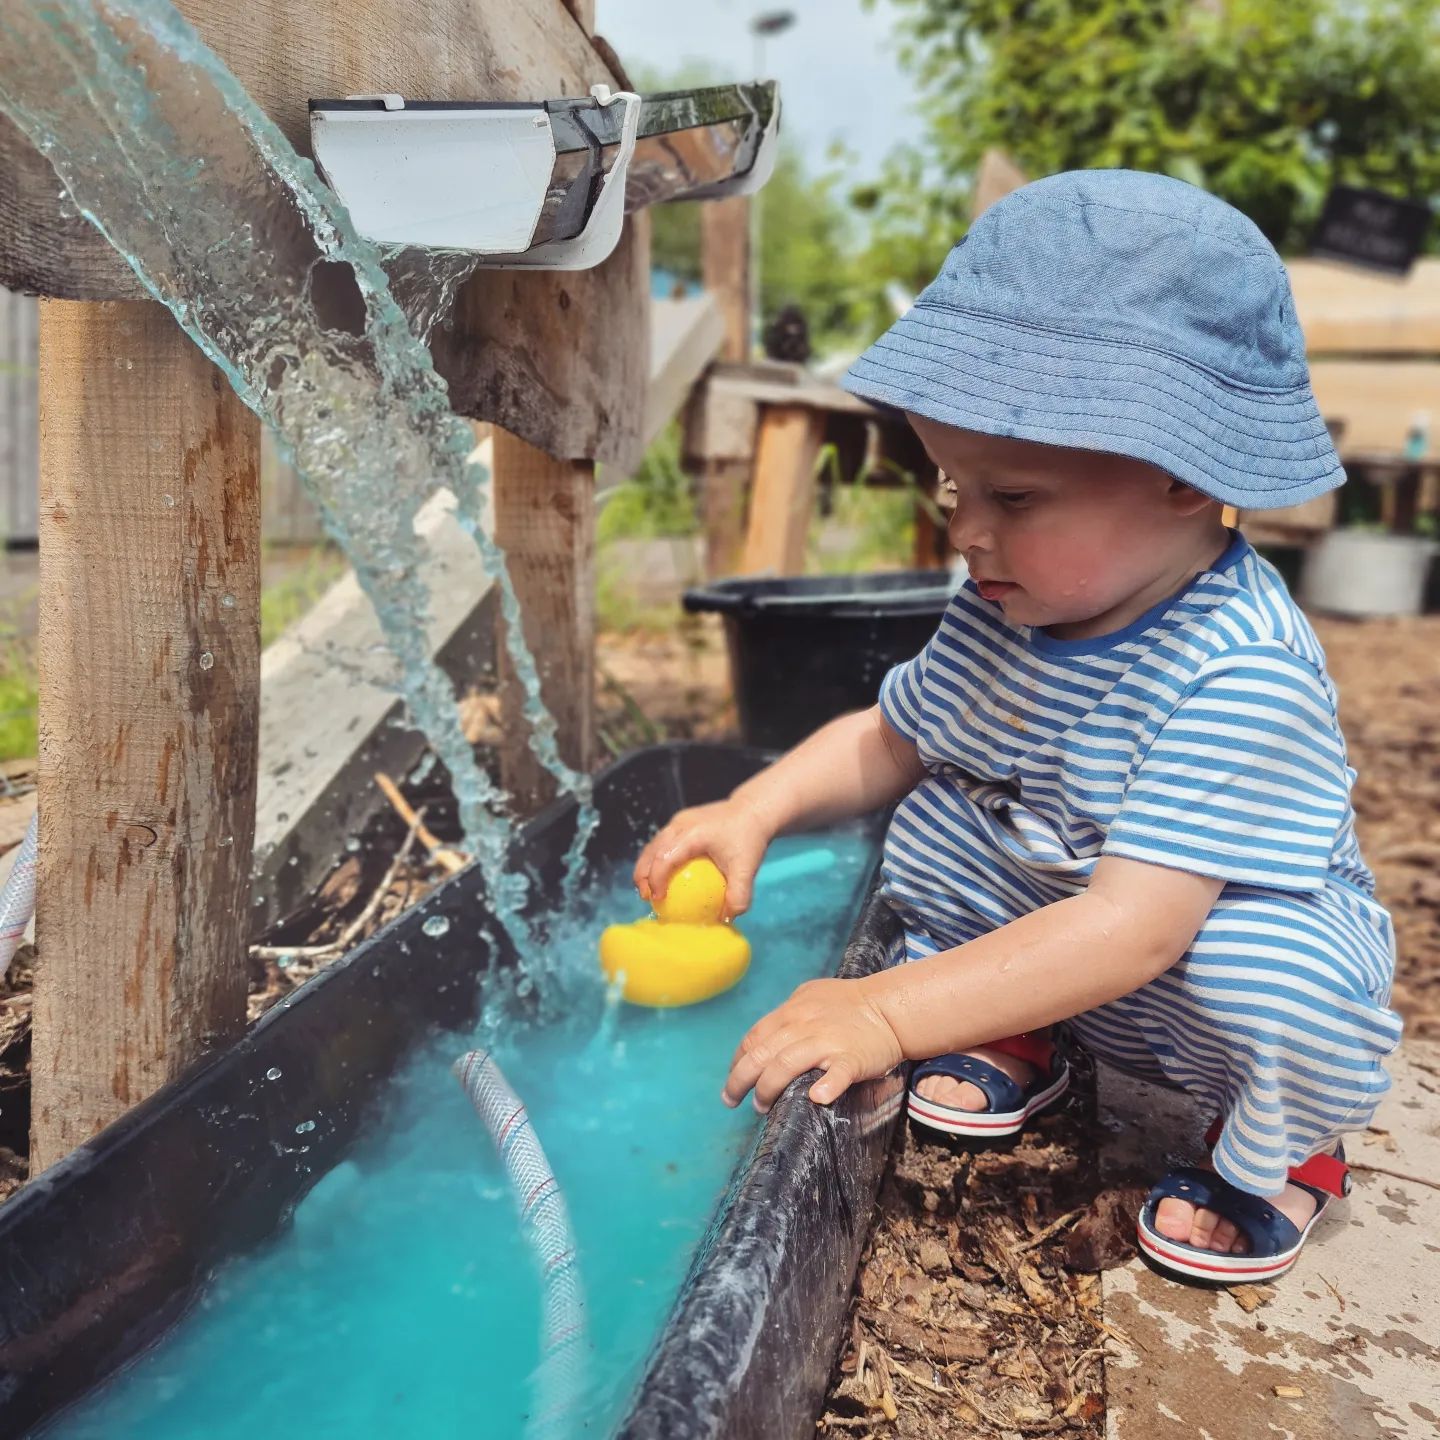 Child playing with Rubber Ducky in Water Bin. Photo by Instagram user @wild_little_wonderers